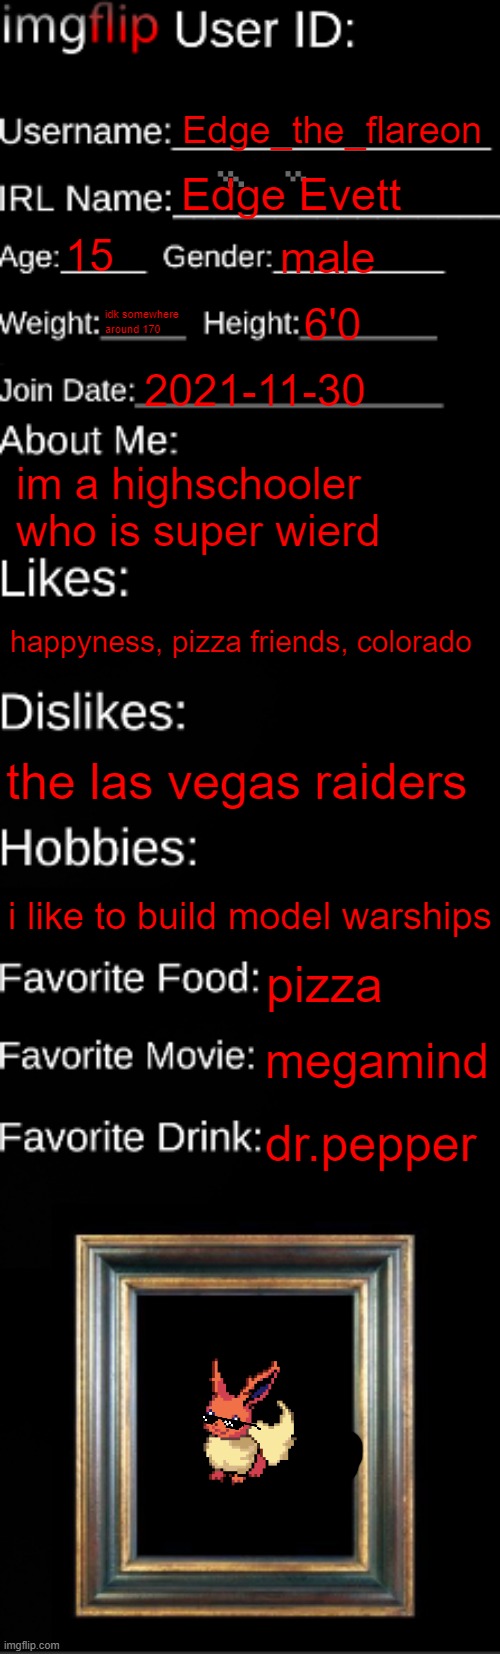 imgflip ID Card | Edge_the_flareon; Edge Evett; 15; male; idk somewhere around 170; 6'0; 2021-11-30; im a highschooler who is super wierd; happyness, pizza friends, colorado; the las vegas raiders; i like to build model warships; pizza; megamind; dr.pepper | image tagged in imgflip id card | made w/ Imgflip meme maker